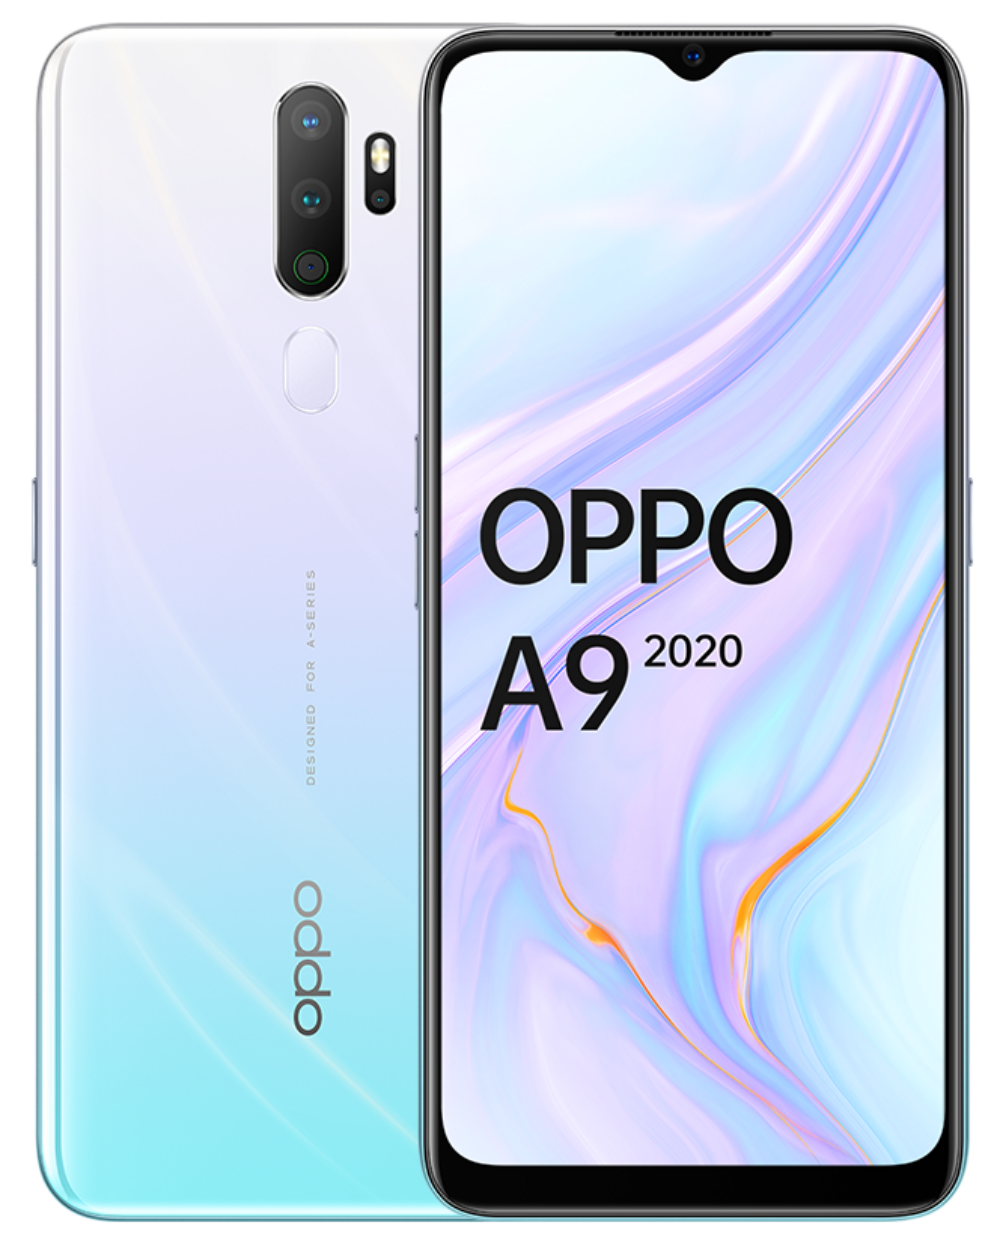 Shopee-OPPO-3.png